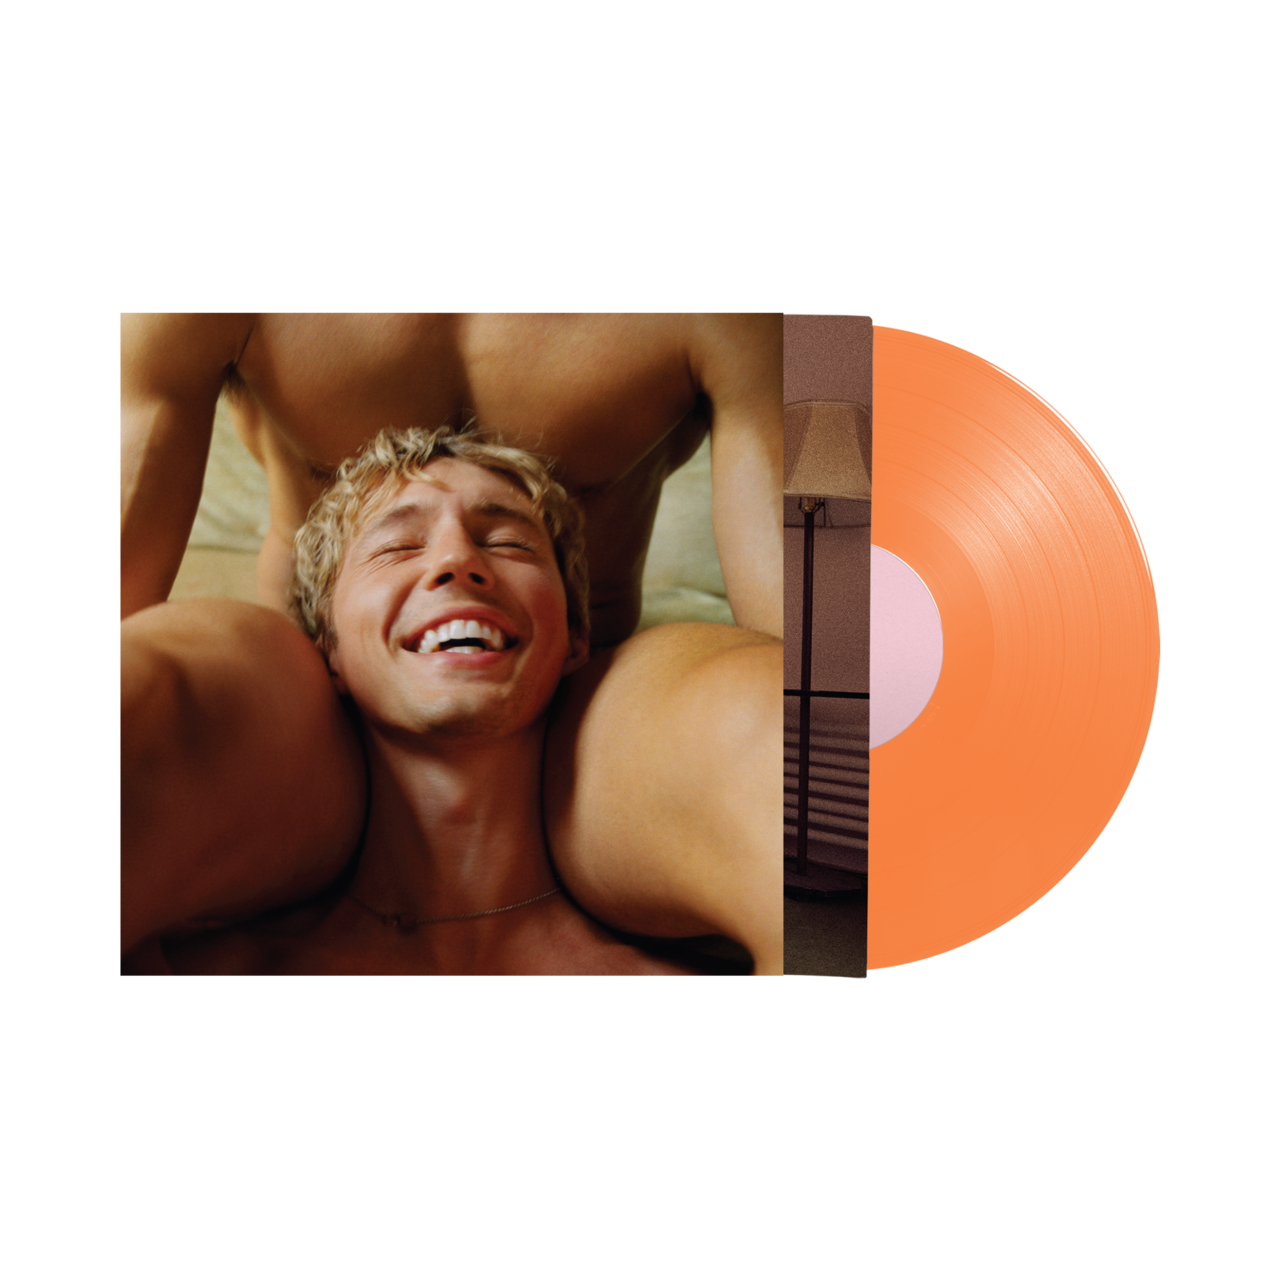 Something To Give Each Other: Limited Orange Vinyl LP + Signed Postcard